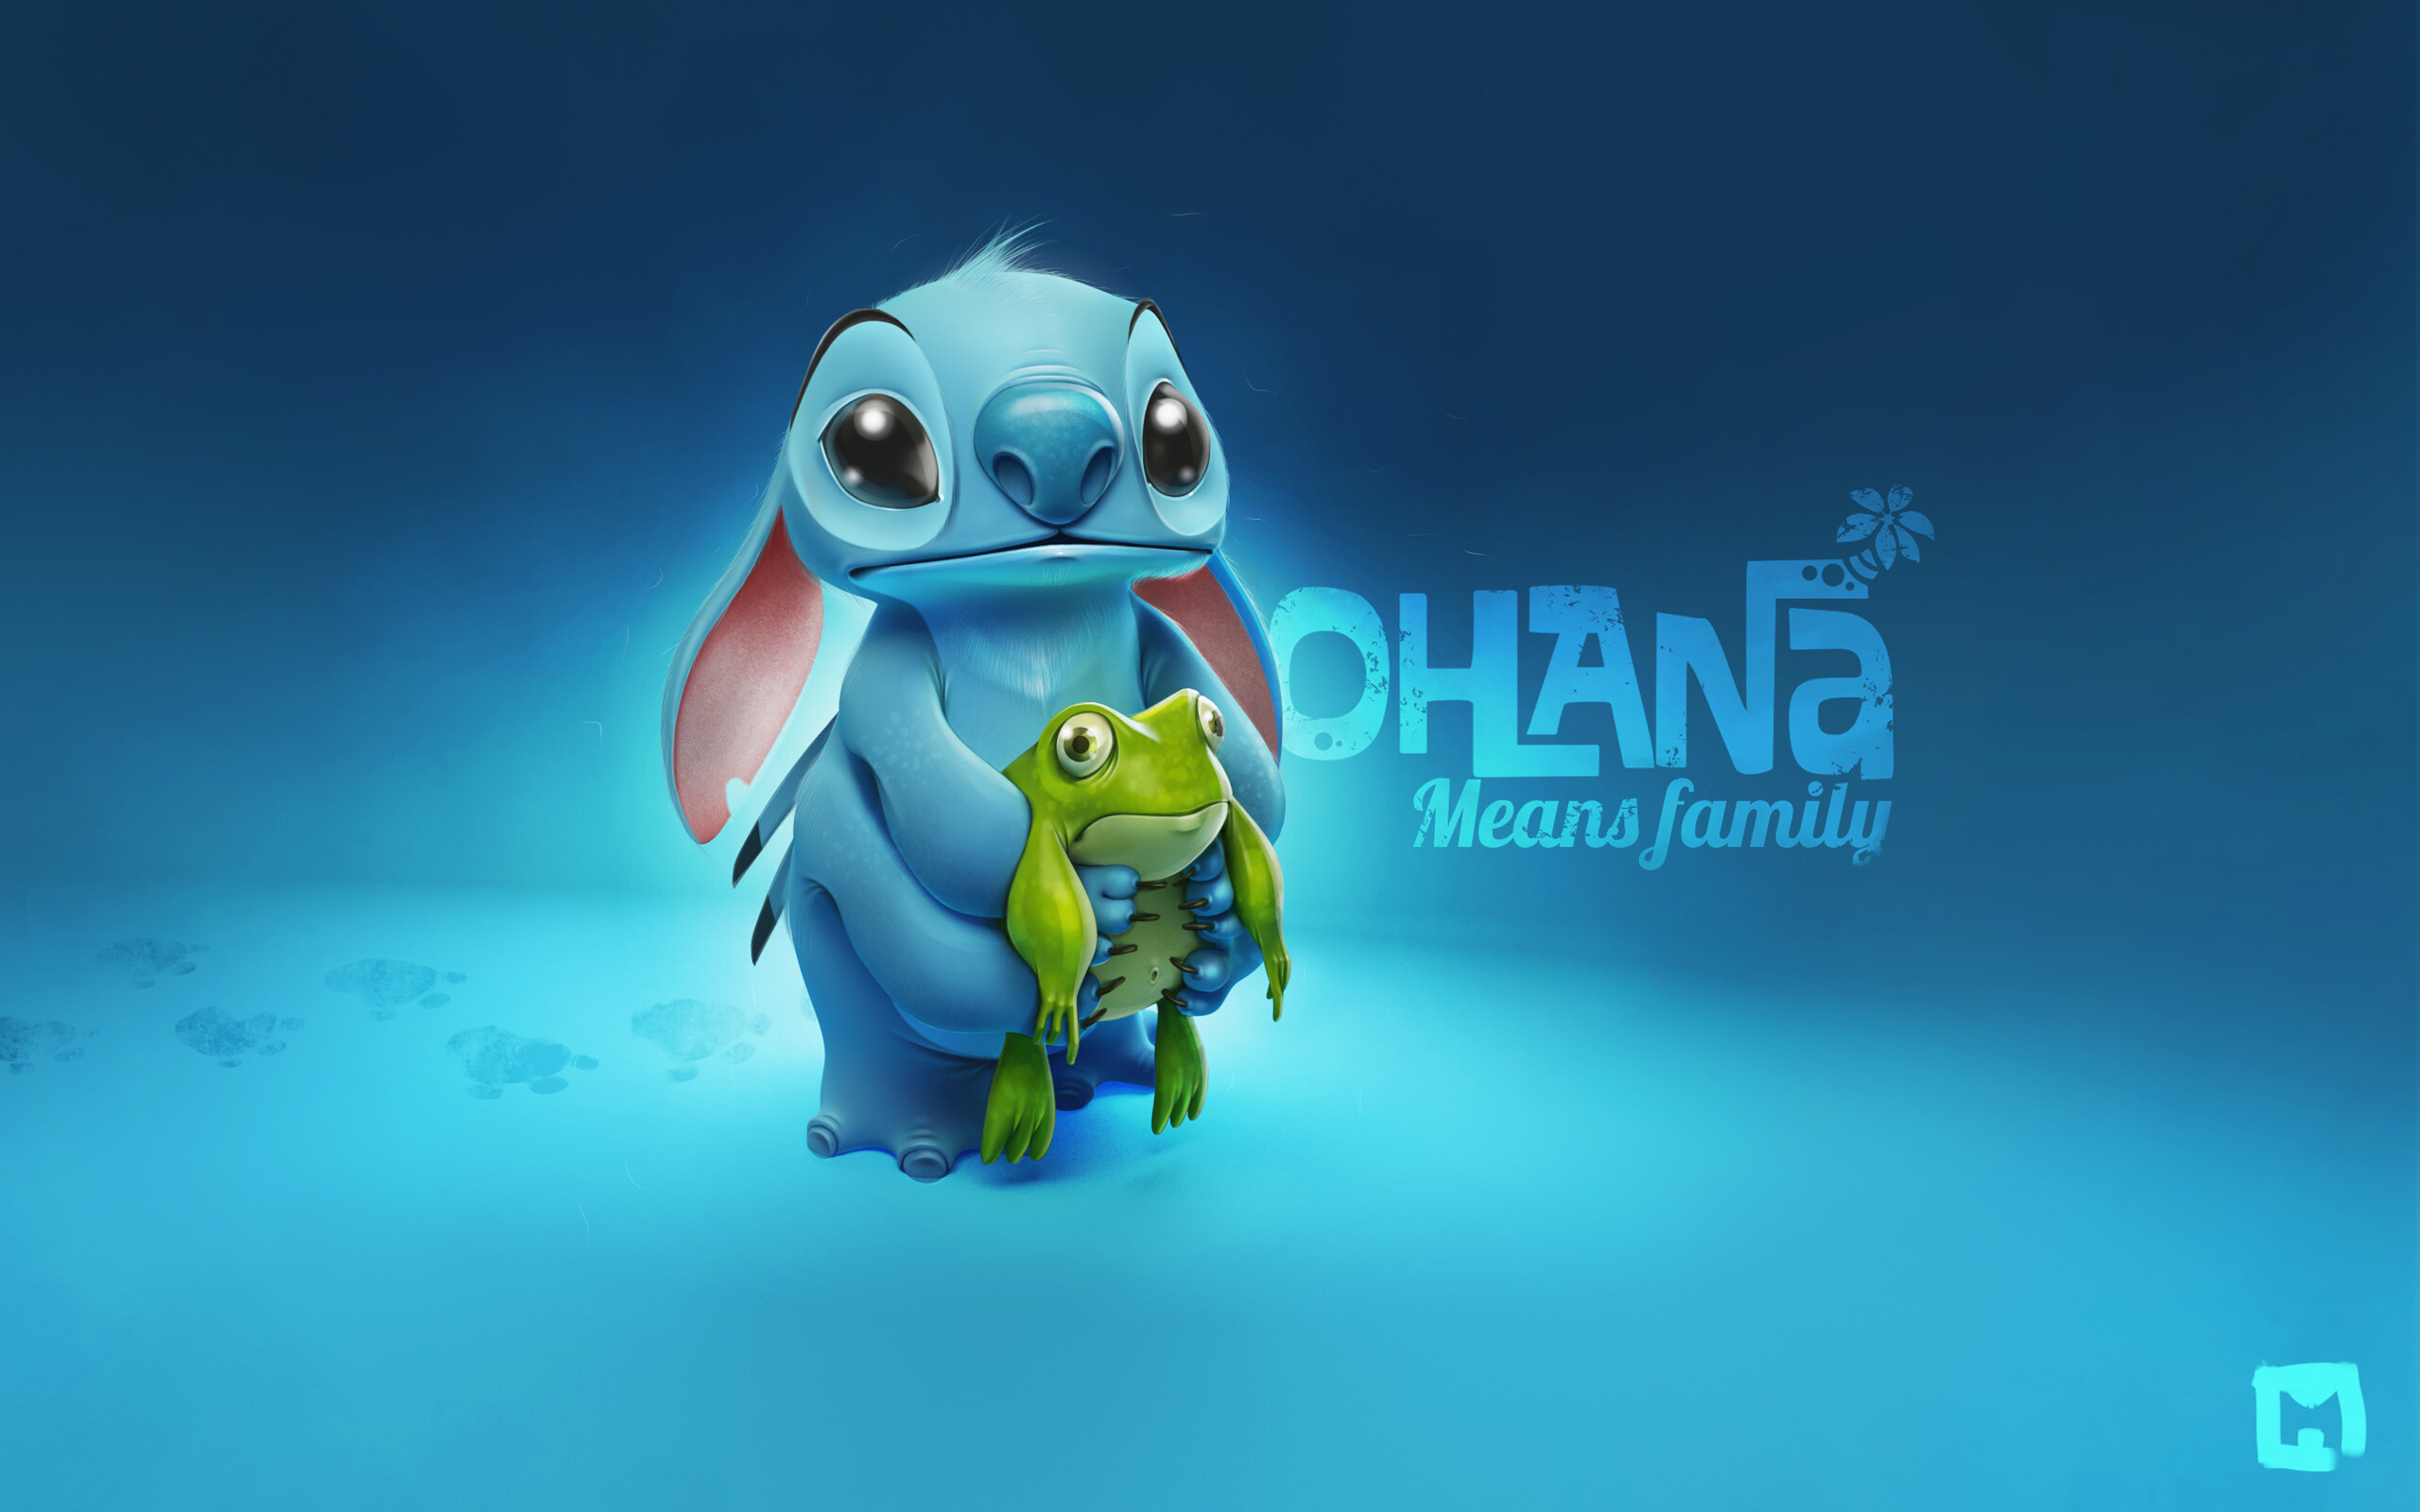 Lilo and Stitch: Experiment 626 was created to cause and create chaos around the galaxy. 2560x1600 HD Wallpaper.